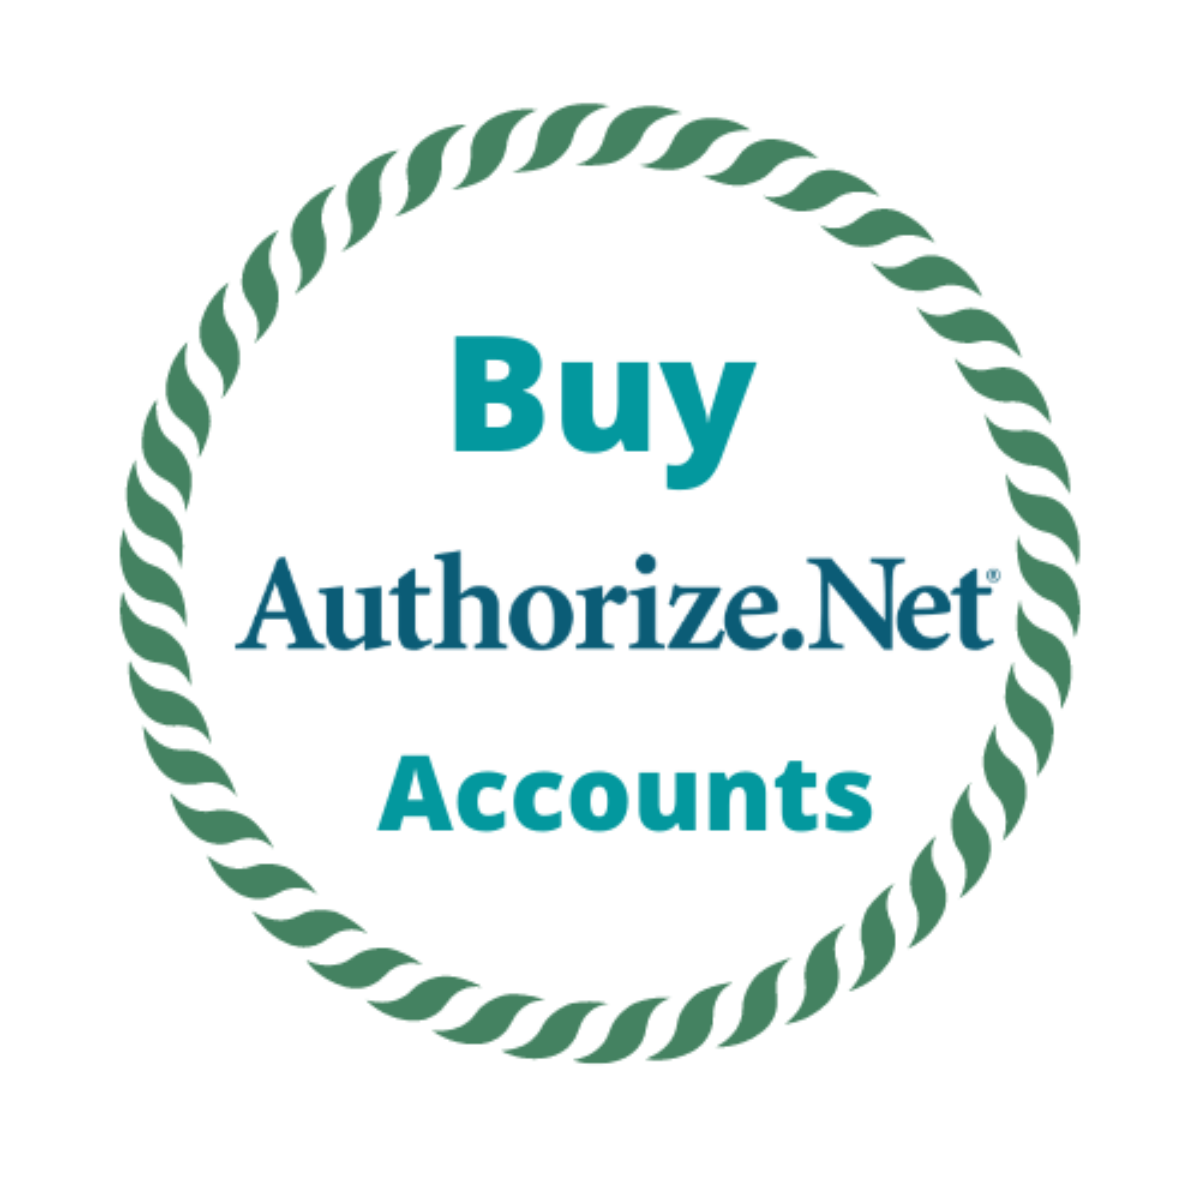 Buy Authorize Account – Trading Authority and Risk